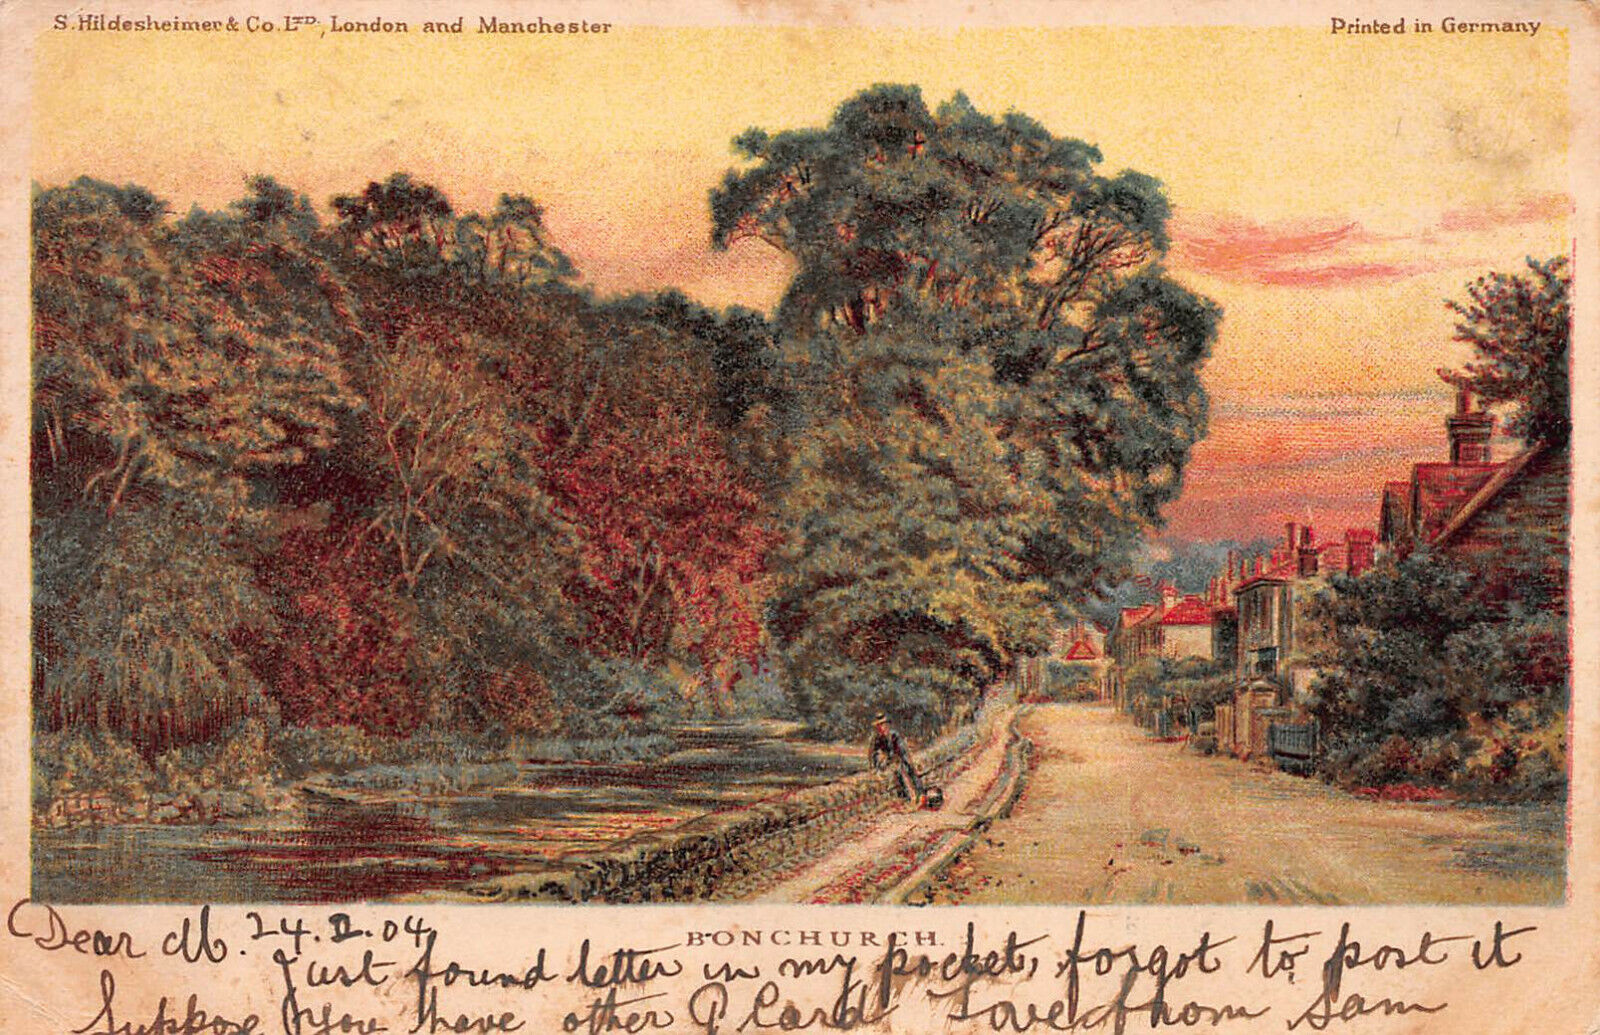 Bonchurch, Isle of Wight, Great Britain, Early Postcard, Used in 1904